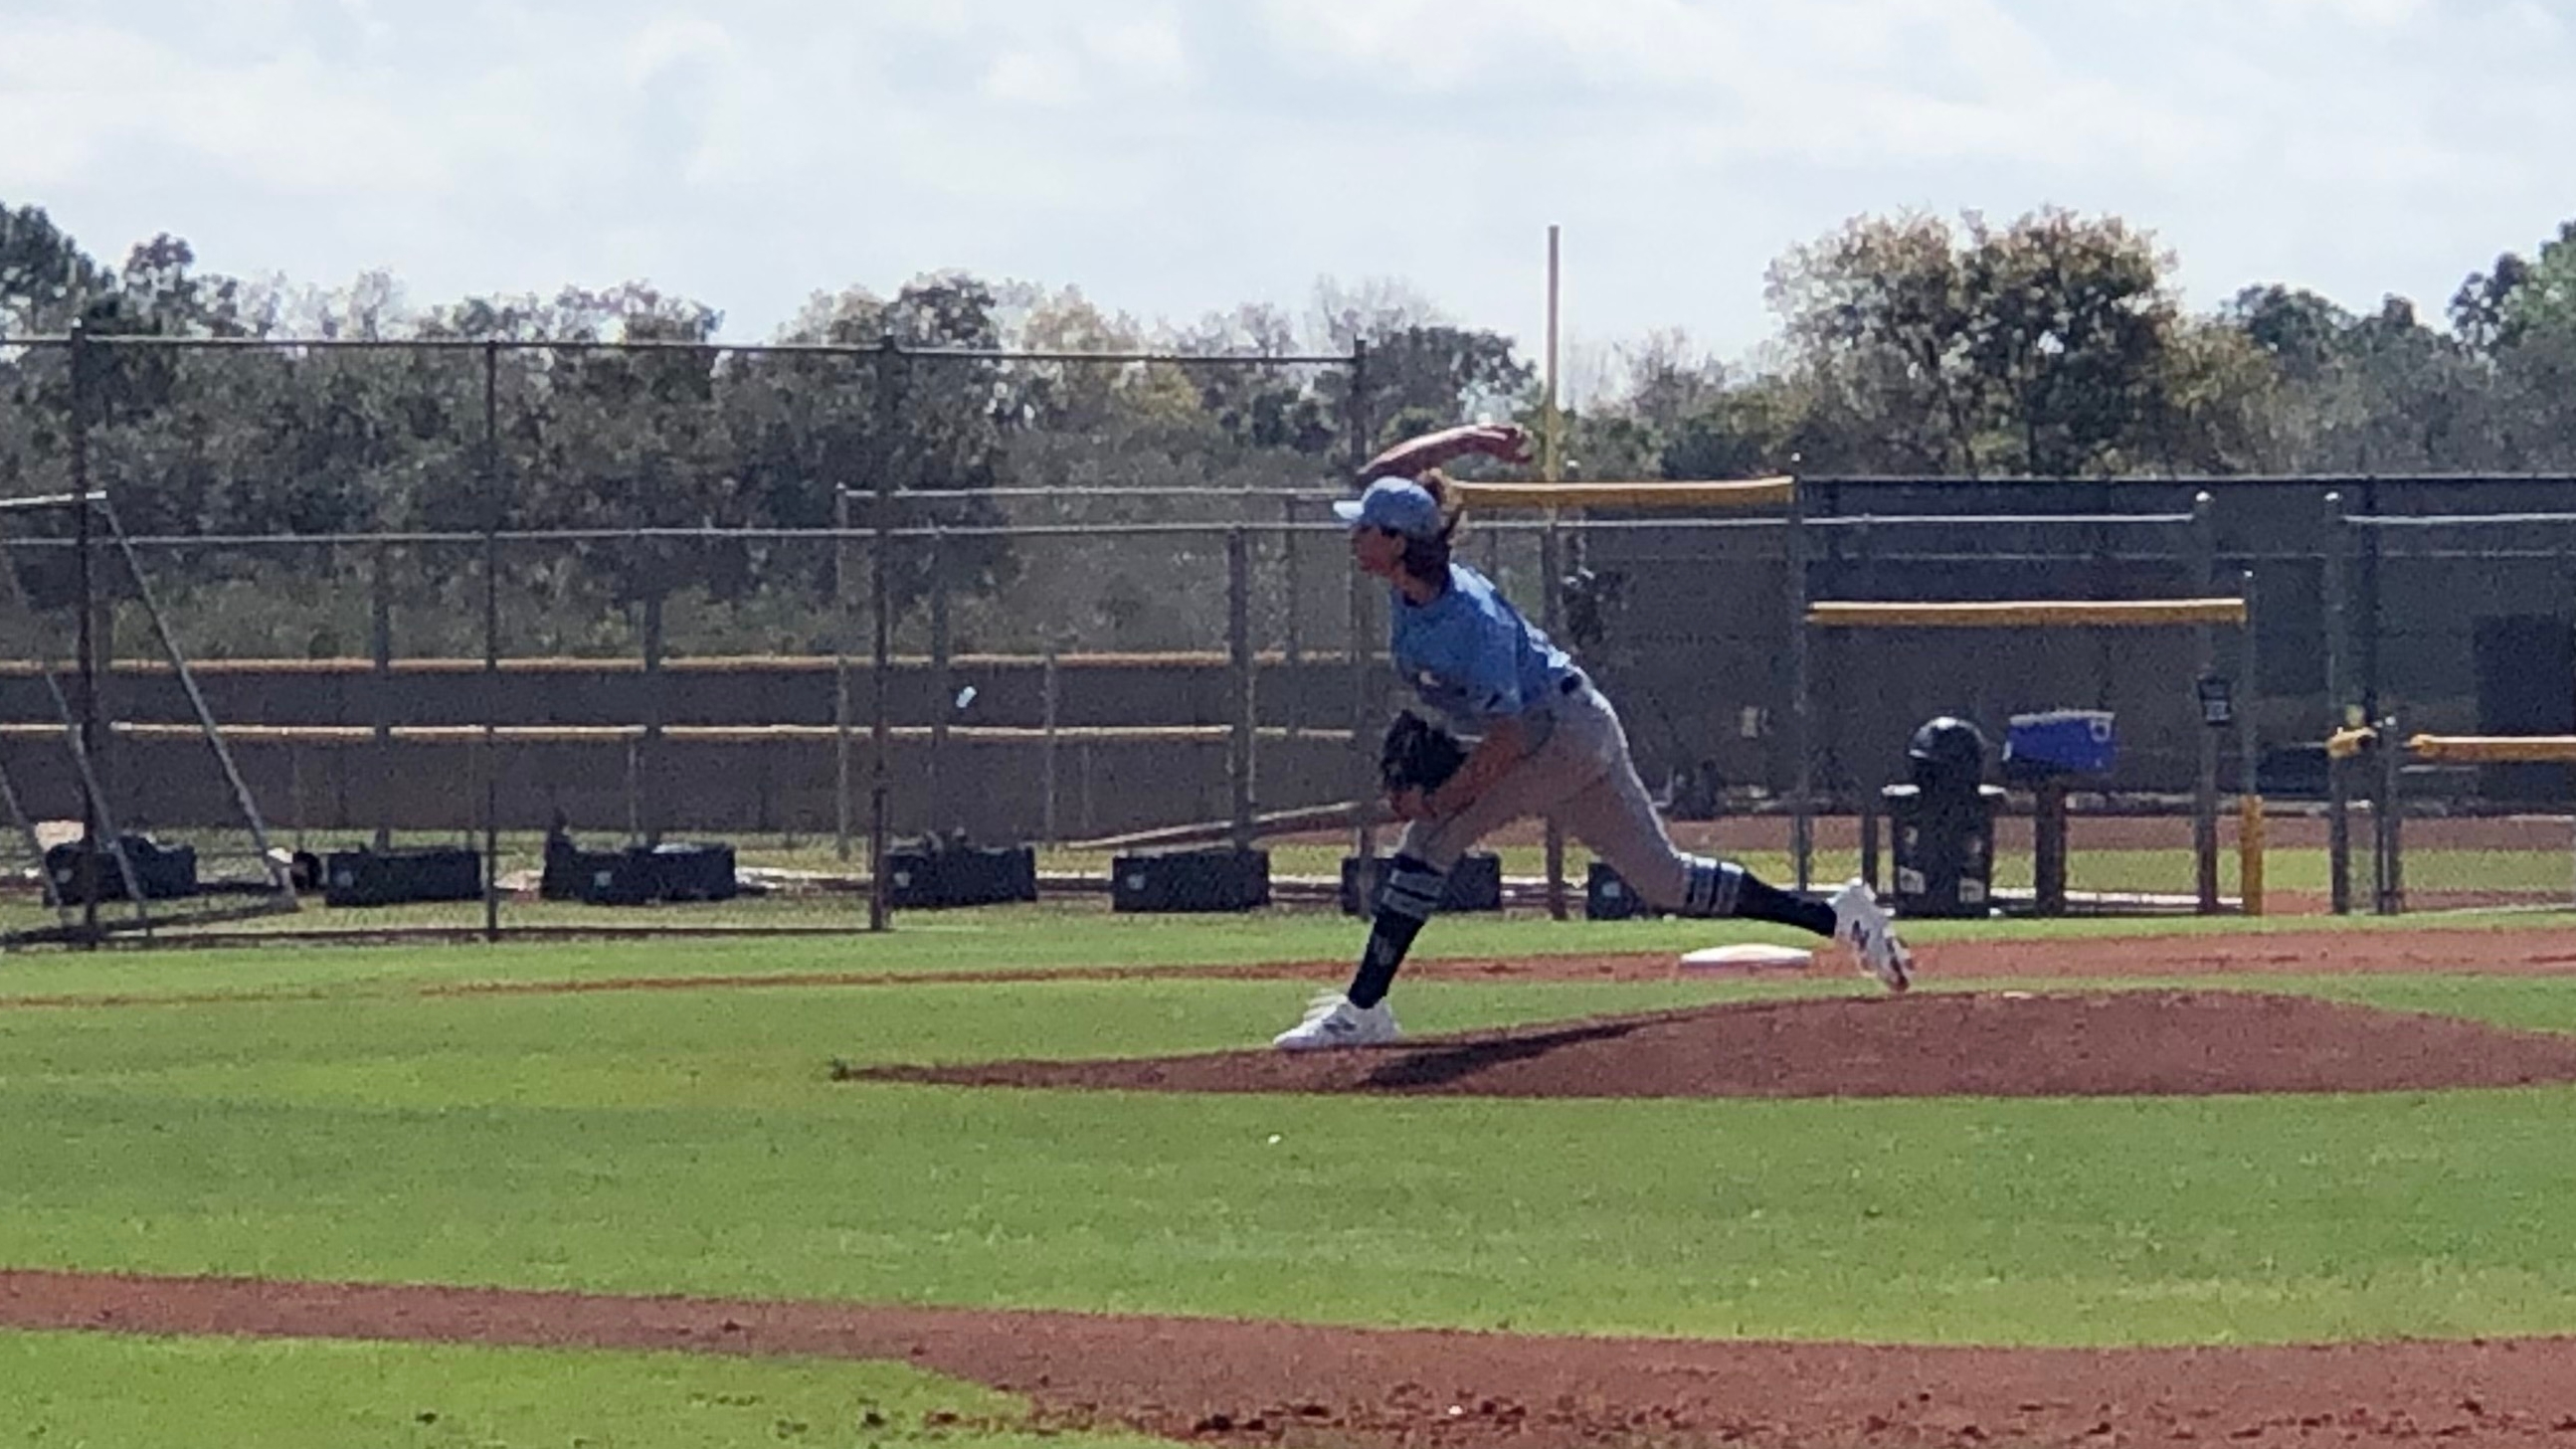 New at Rays camp: Tyler Glasnow has a slider